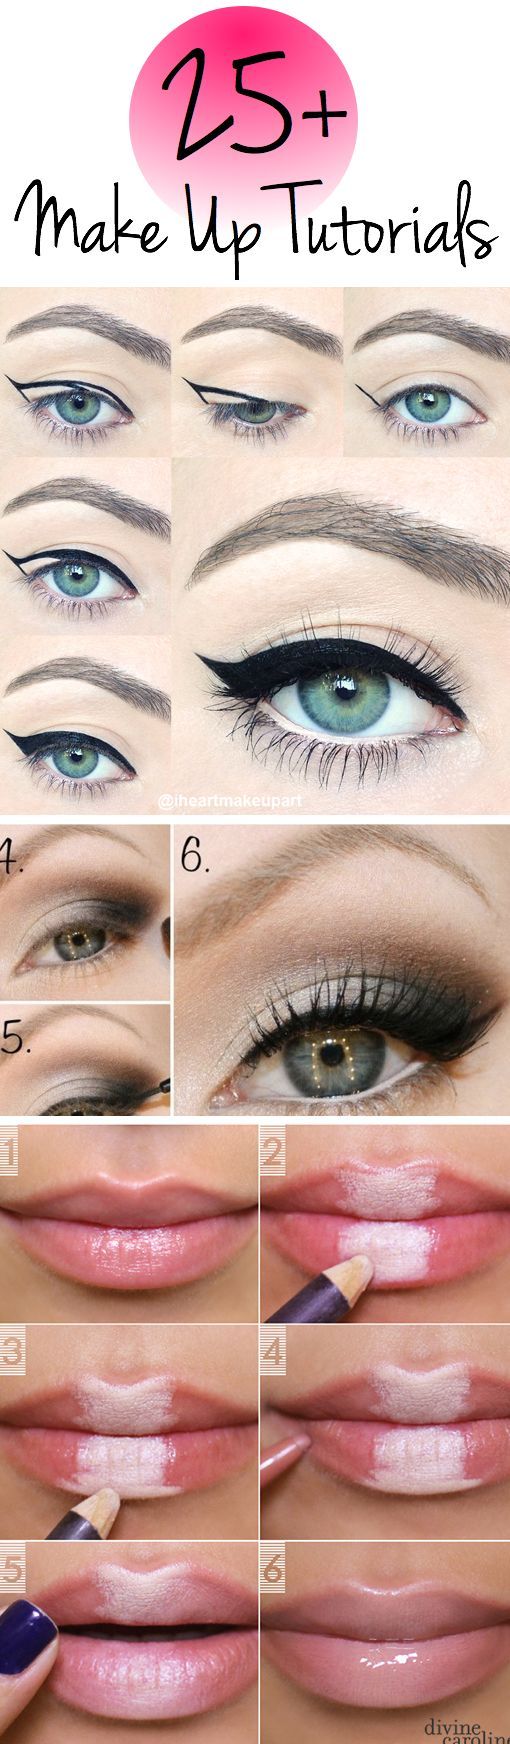 25+ Make Up Tutorials To Take Your Beauty To The Next Level